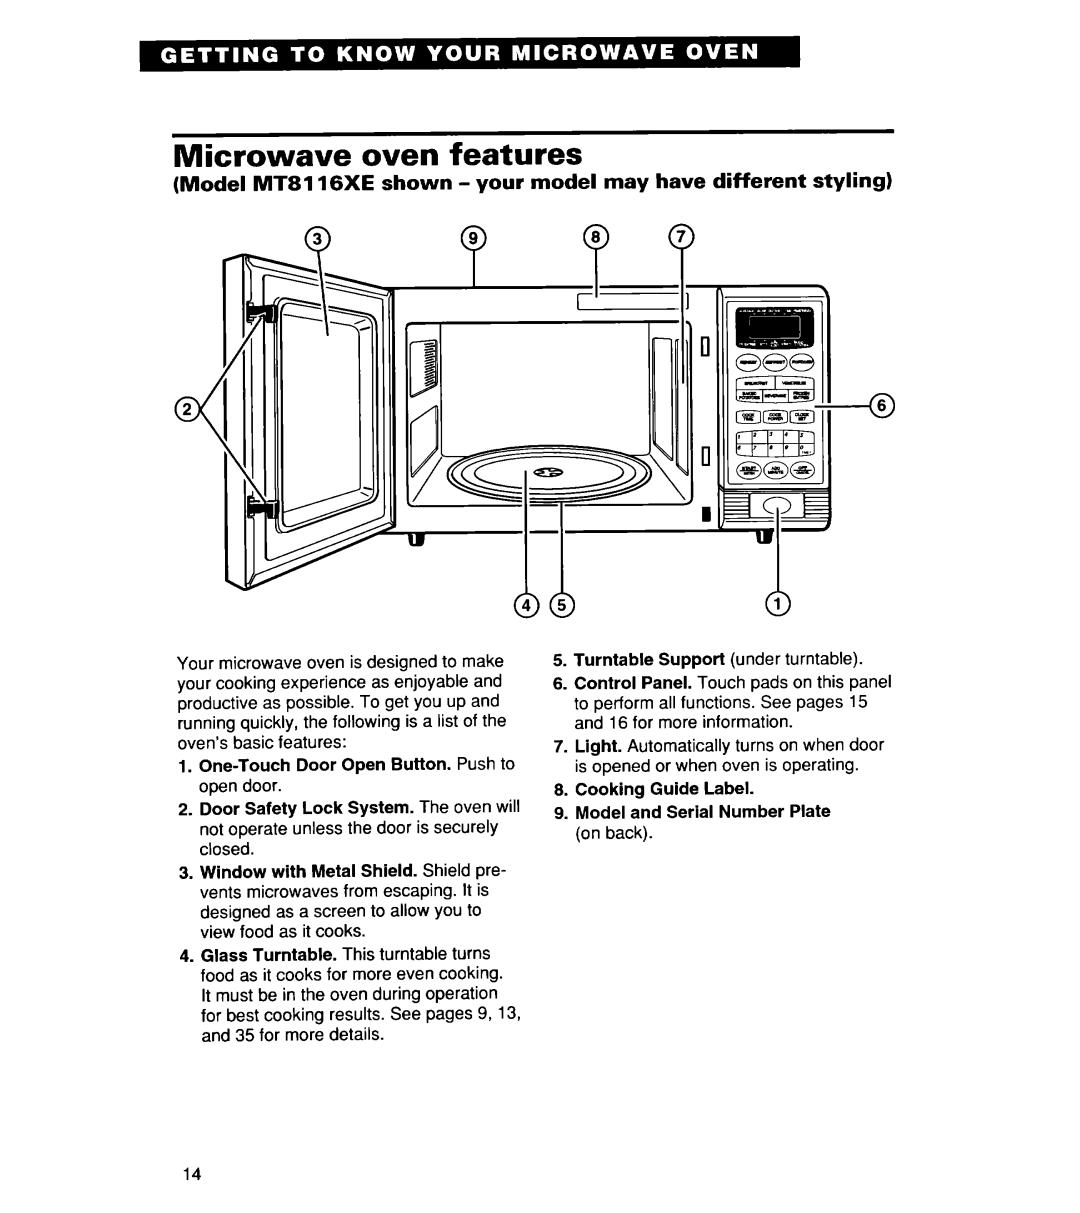 Whirlpool YMT8076SE, YMT9114SF, MT8118XE, MT8116XE, YMT8116SE, YMT8078SE, YMT8118SE Microwave oven features 